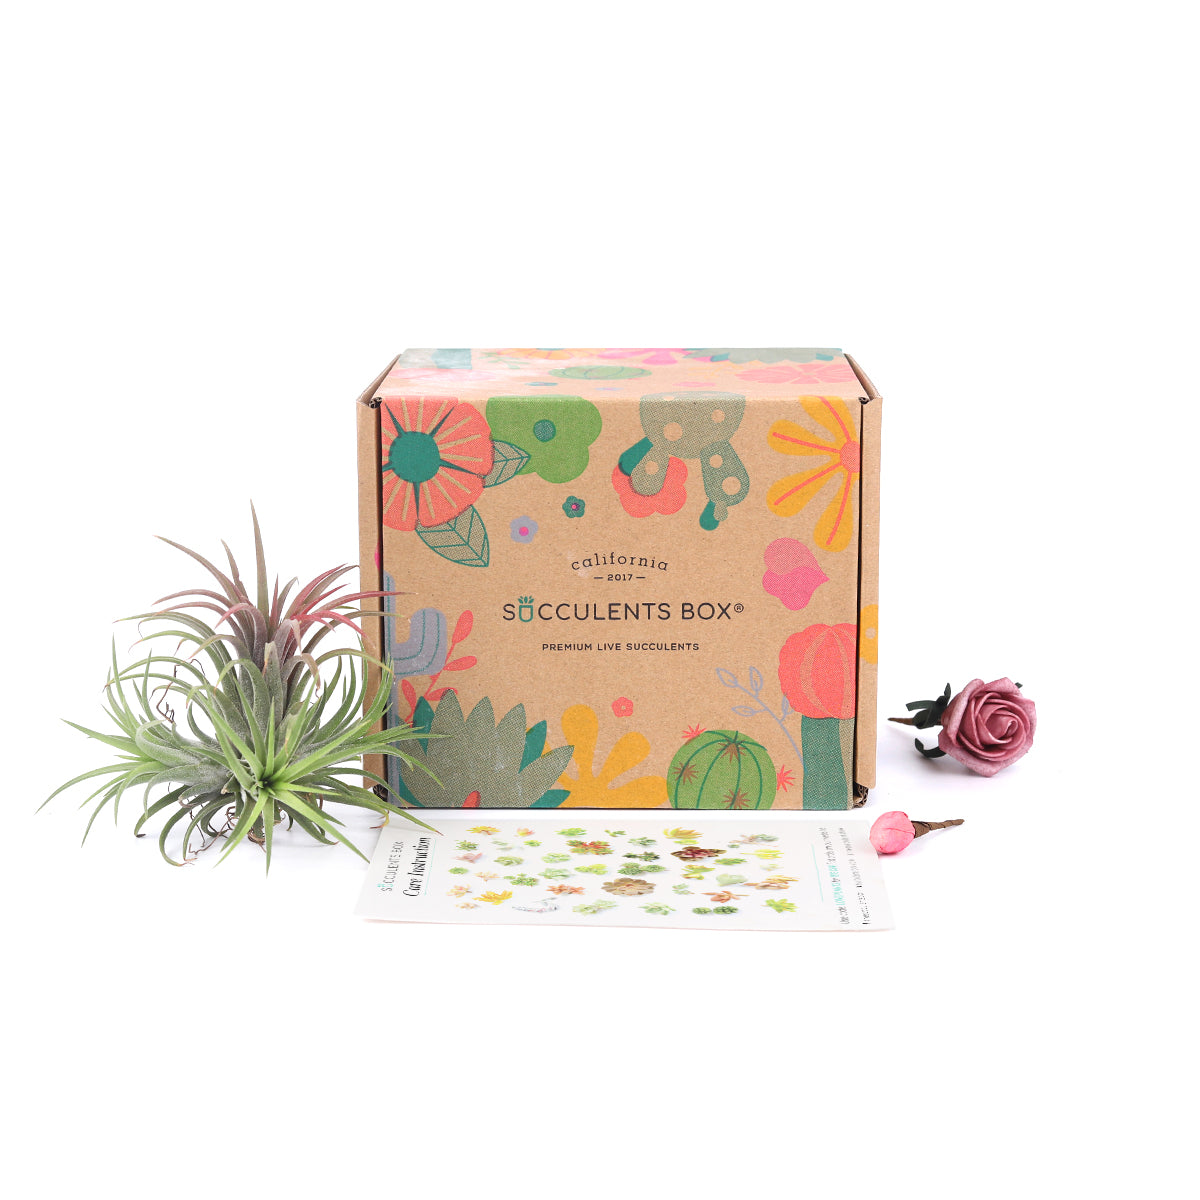 new mom subscription box, subscription boxes for mother's day, best subscription boxes for mother's day, Air Plant Gift for sale, Succulents for Sale, Types of Succulents, Succulents Shop in California, Succulents and Cactus Plants